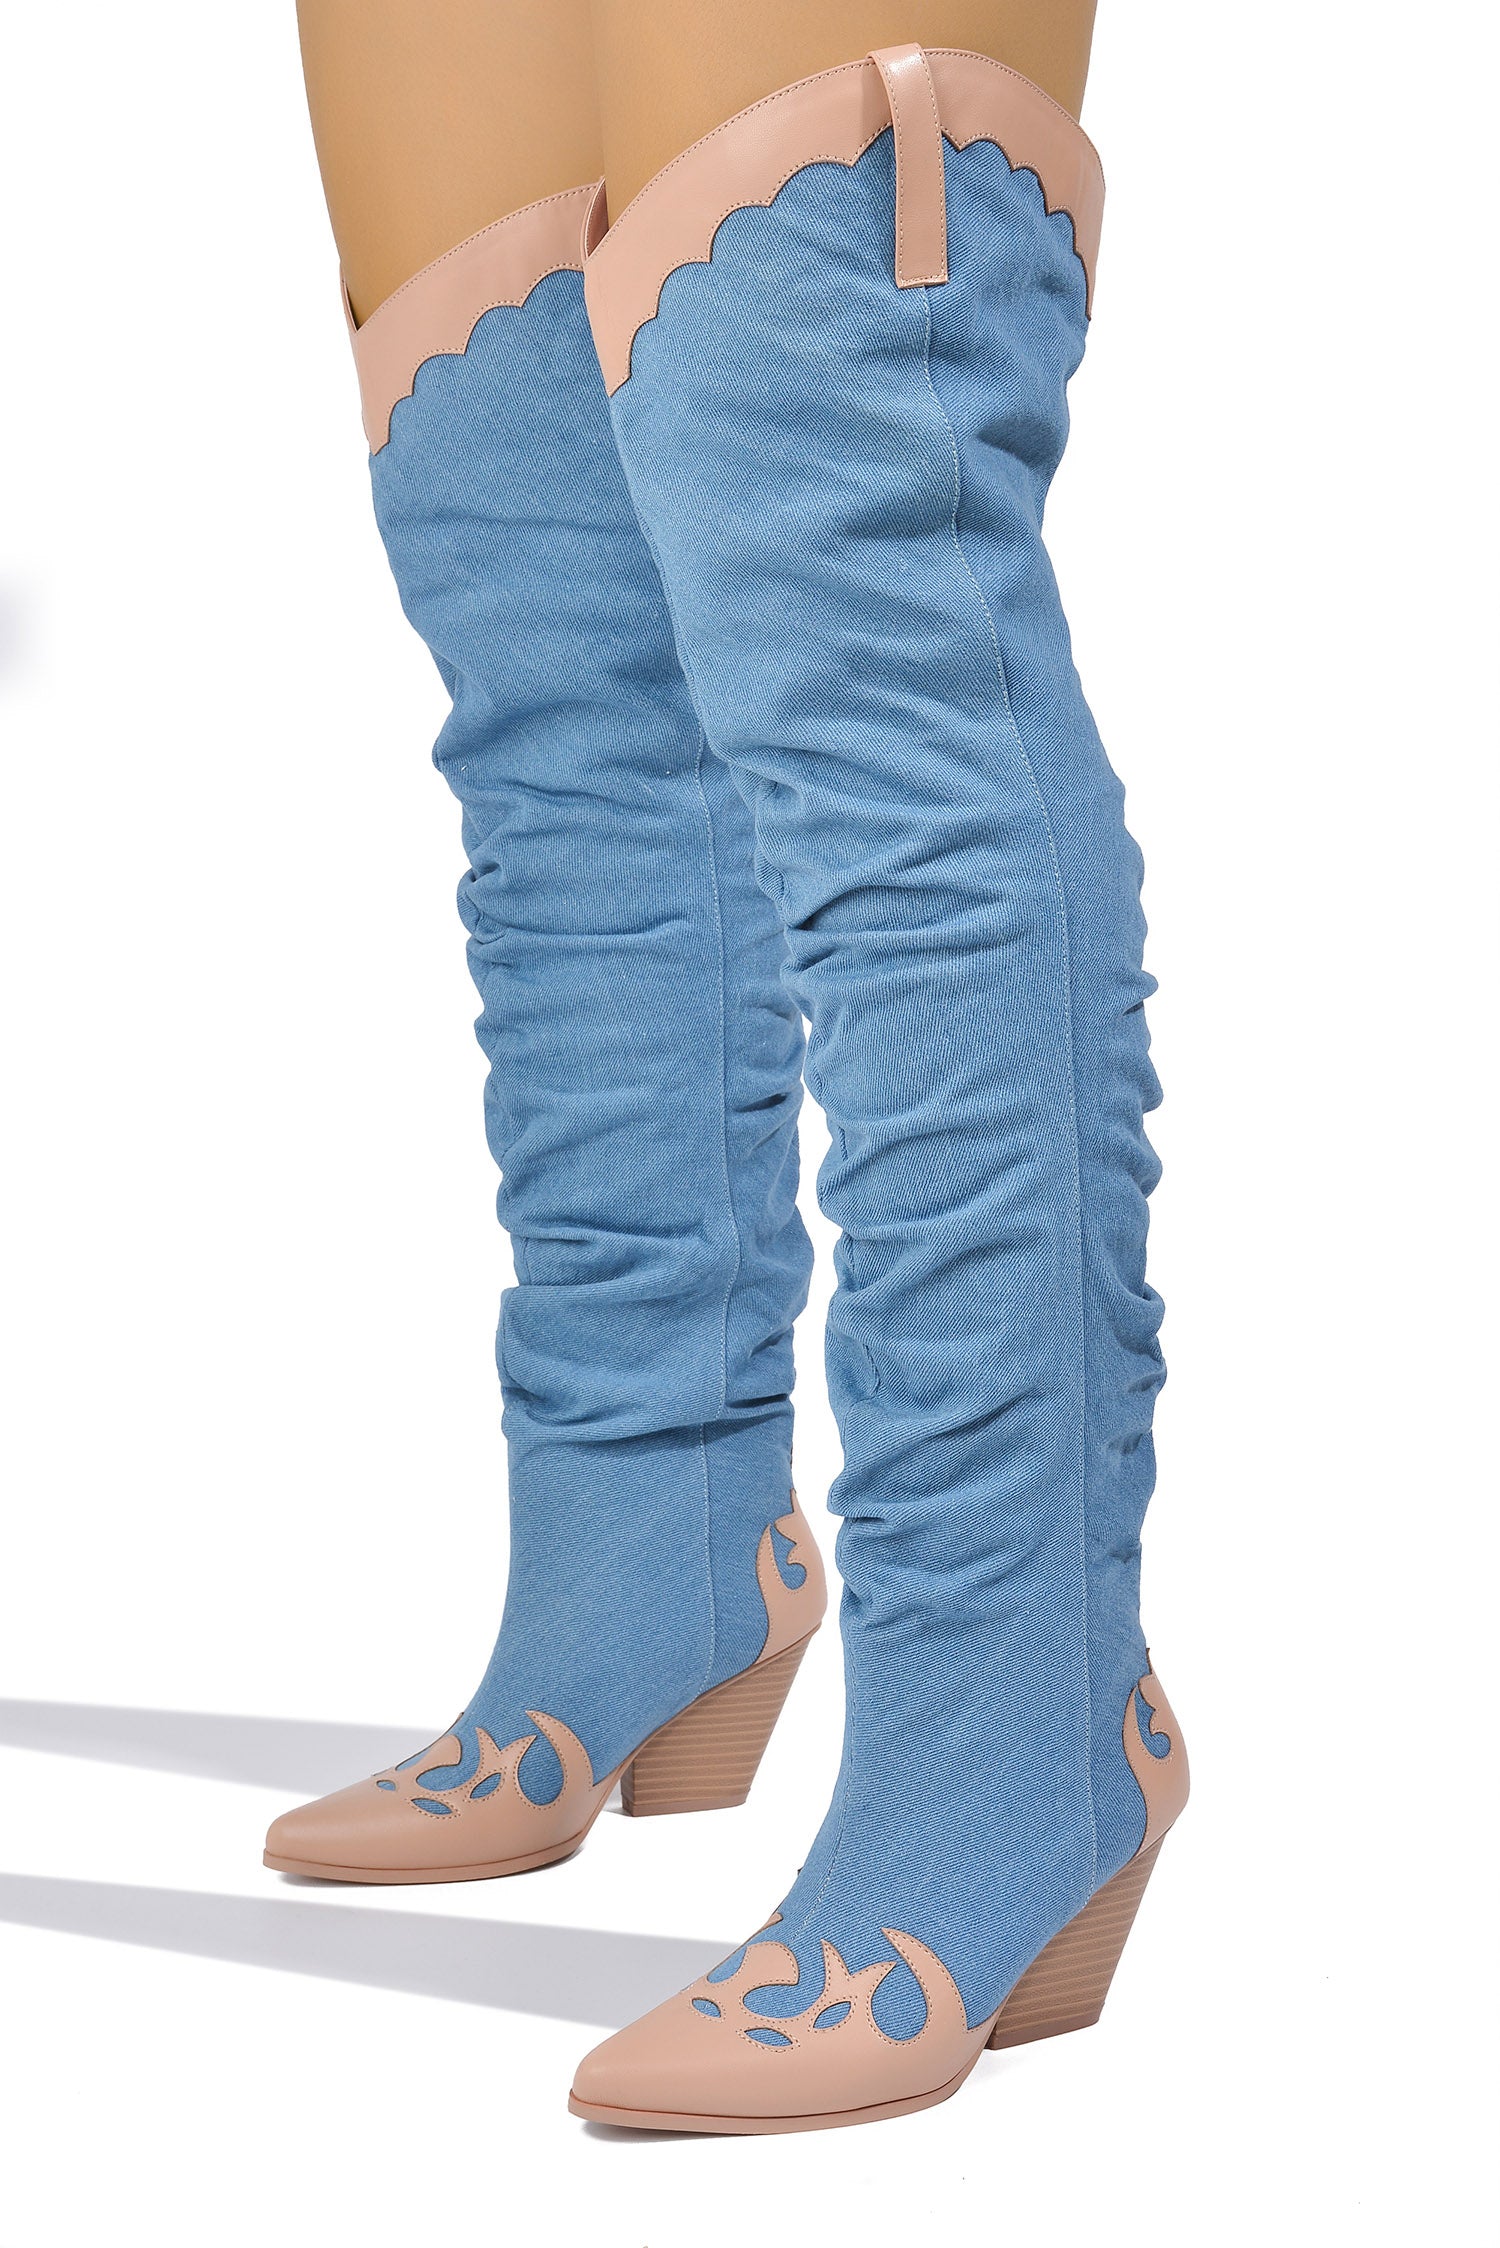 UrbanOG - Jeans Pointy Toe Thigh-High Denim Boots - BOOTS